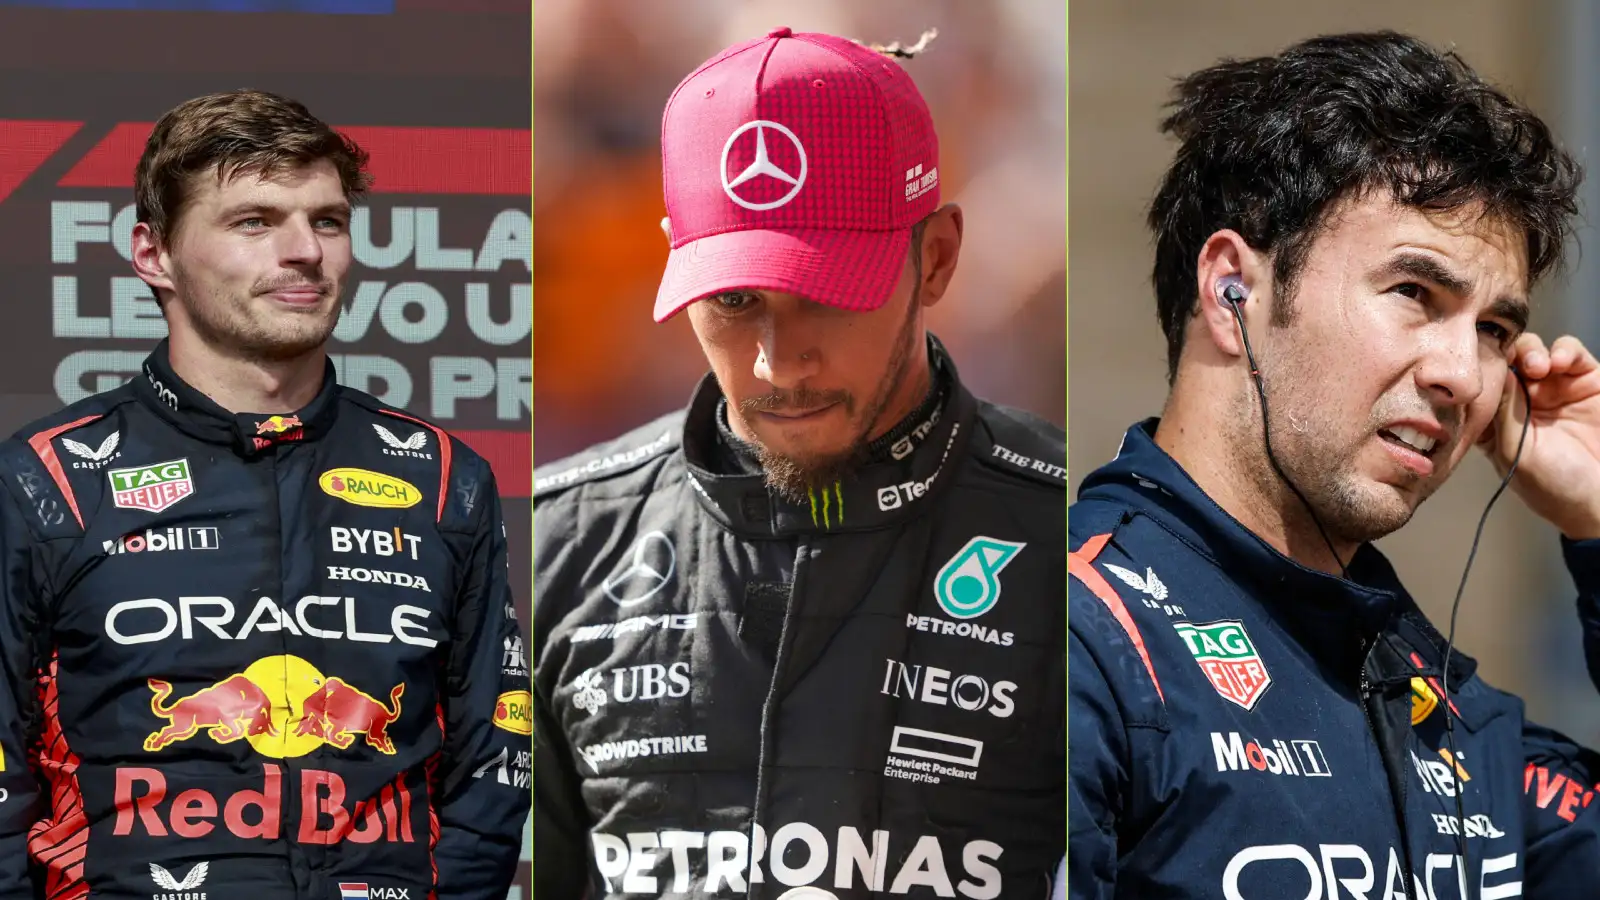 F1's most-talked F1 drivers on Reddit, Max Verstappen, Lewis Hamilton, and Sergio Perez.